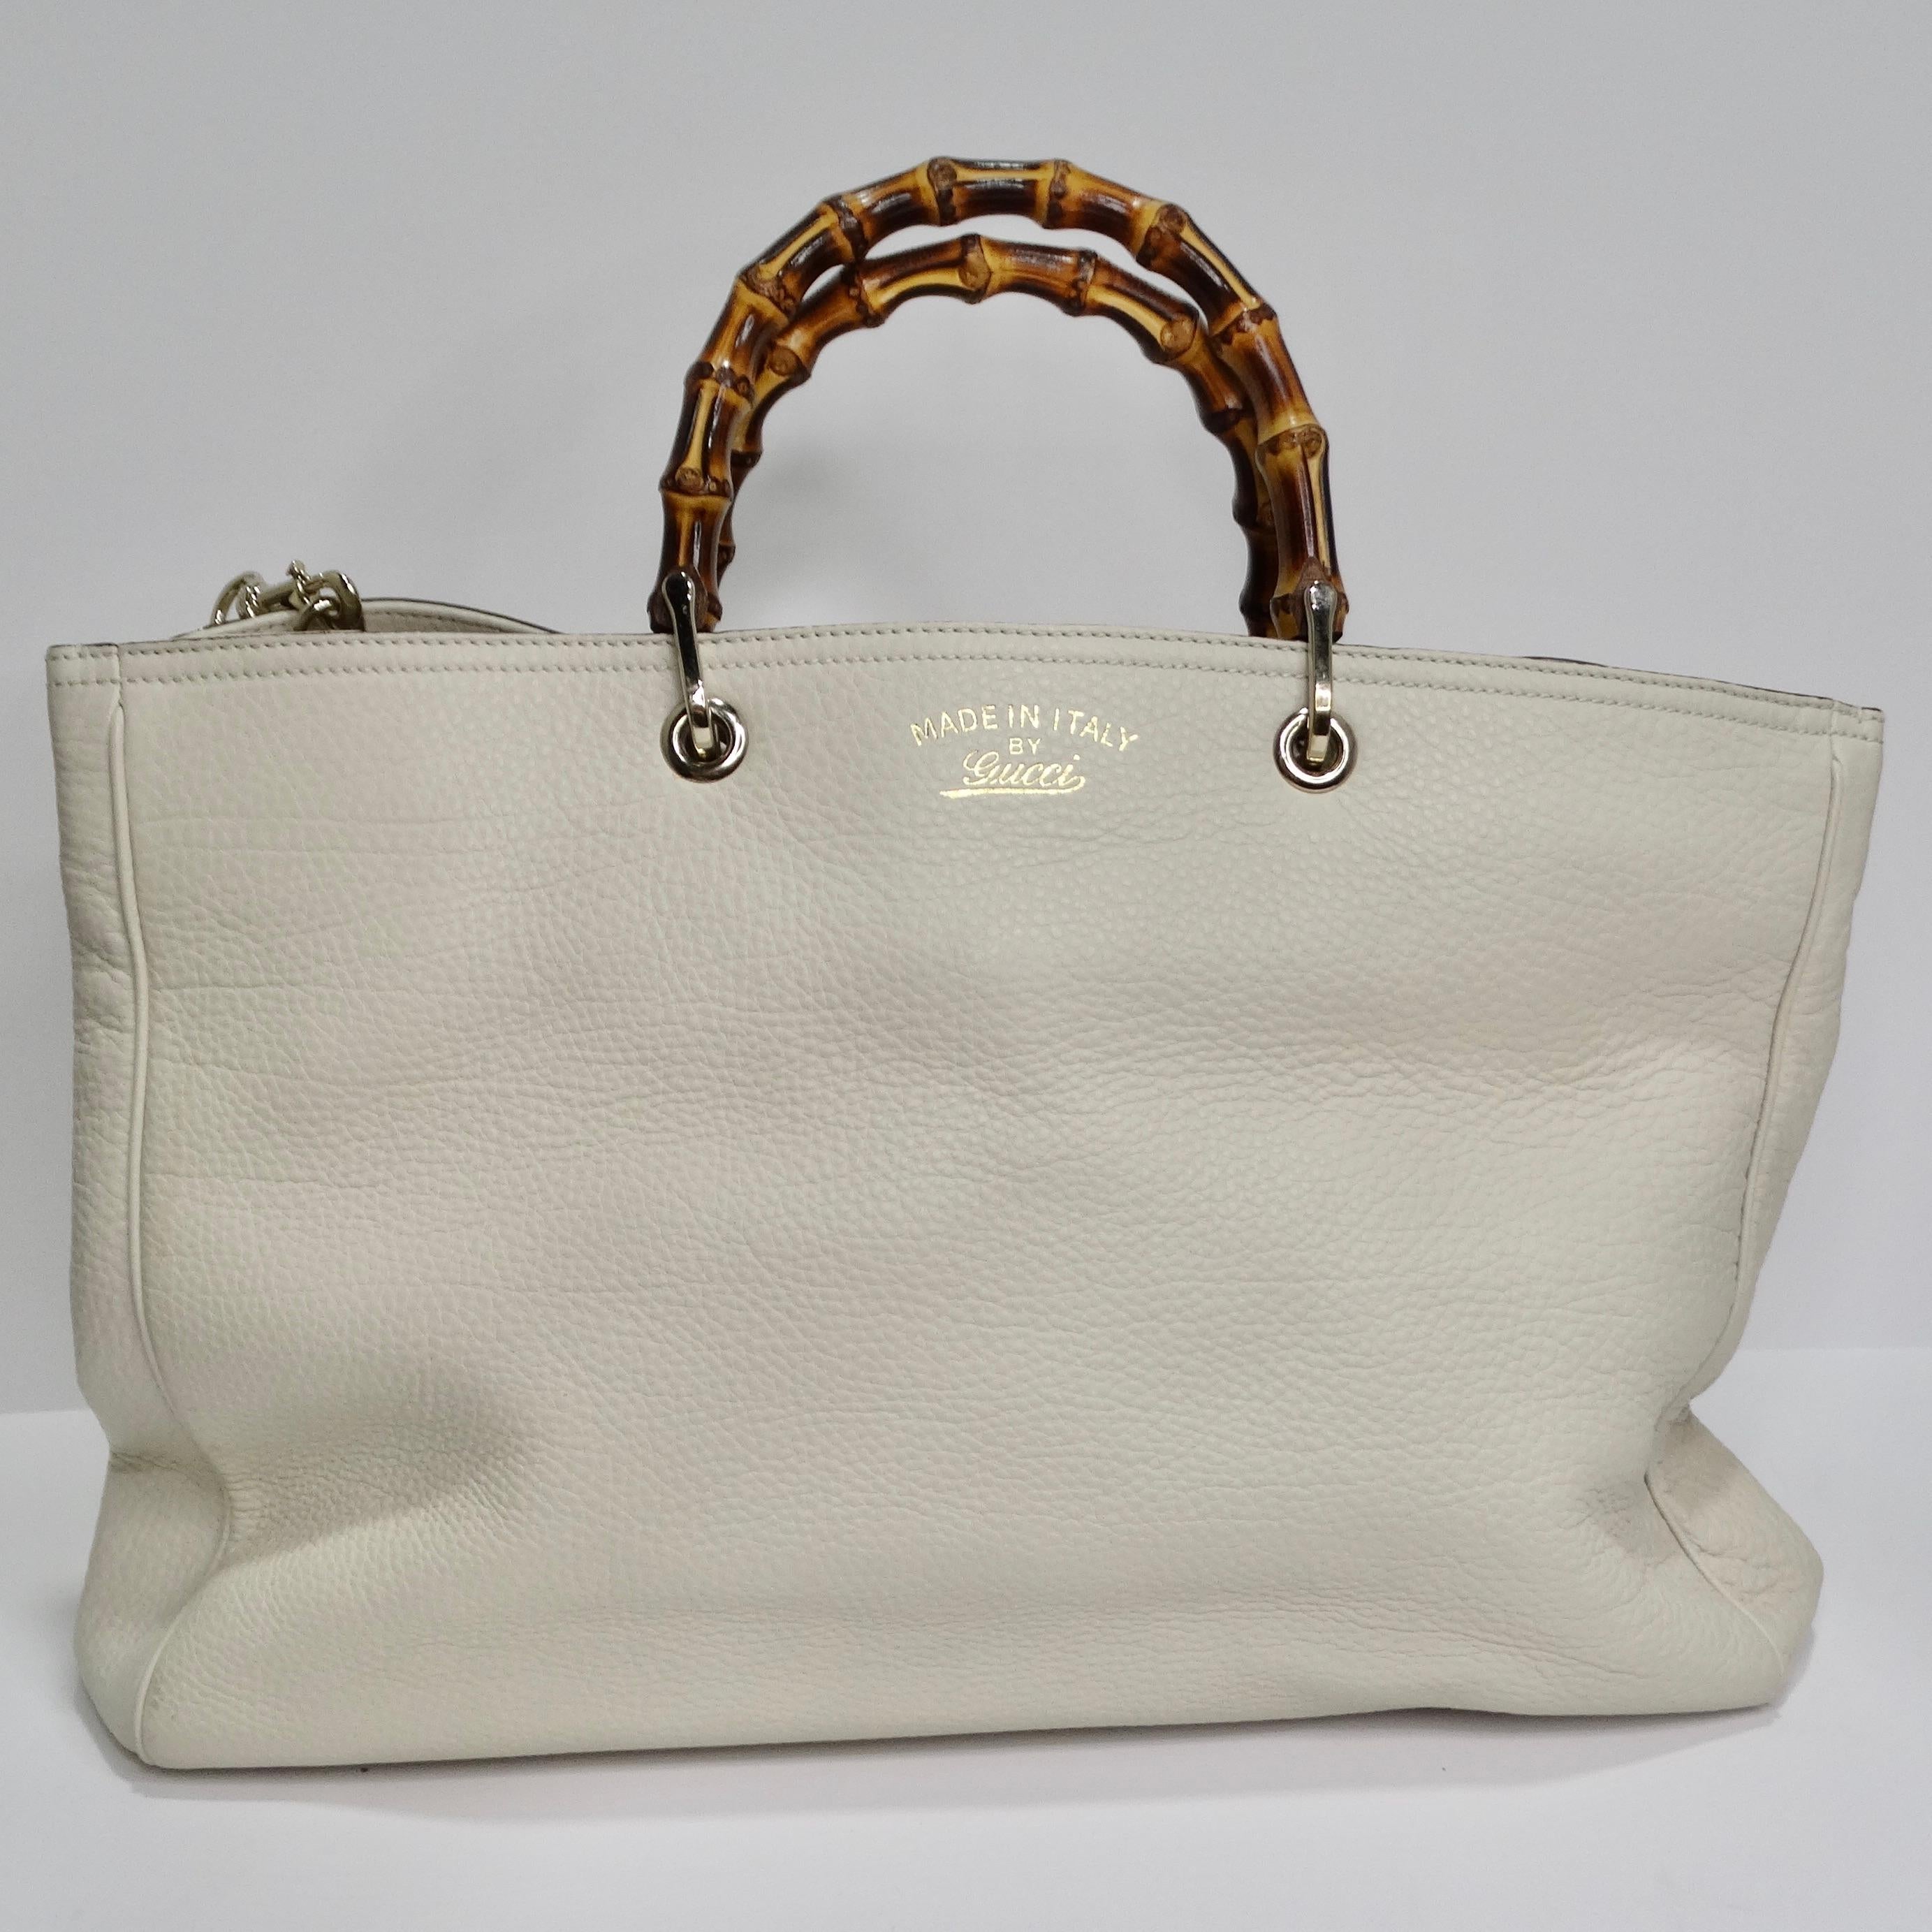 Gucci - Bamboo, used as a handle of handbags by Gucci since the 40s,  features in a bag crafted in crocodile leather over a hooded anorak with  the House Web stripe, in